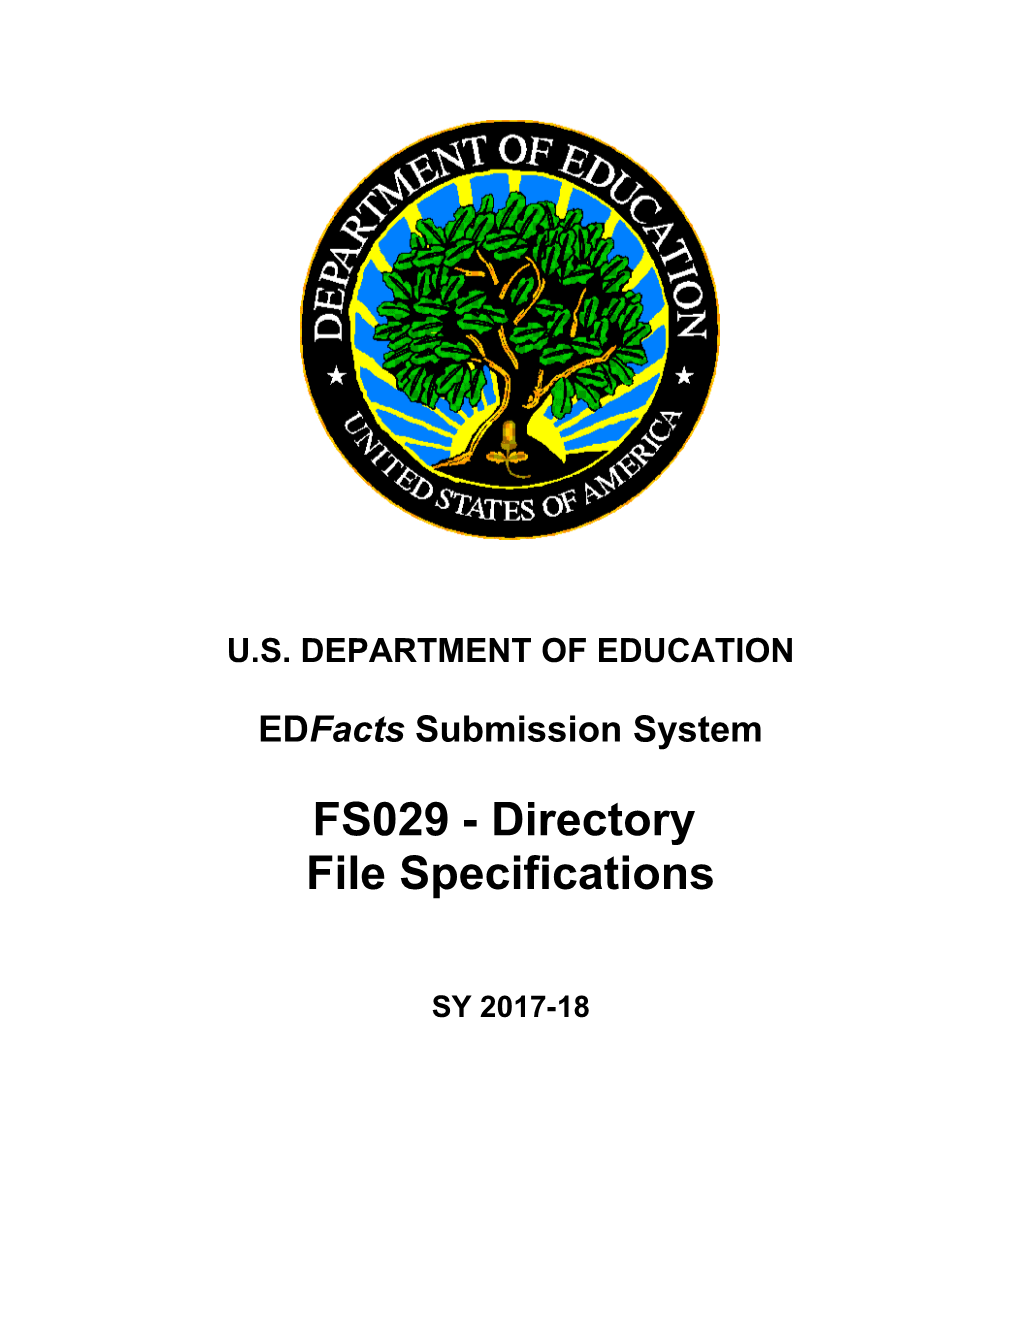 FS029 - Directory File Specifications (Msword)